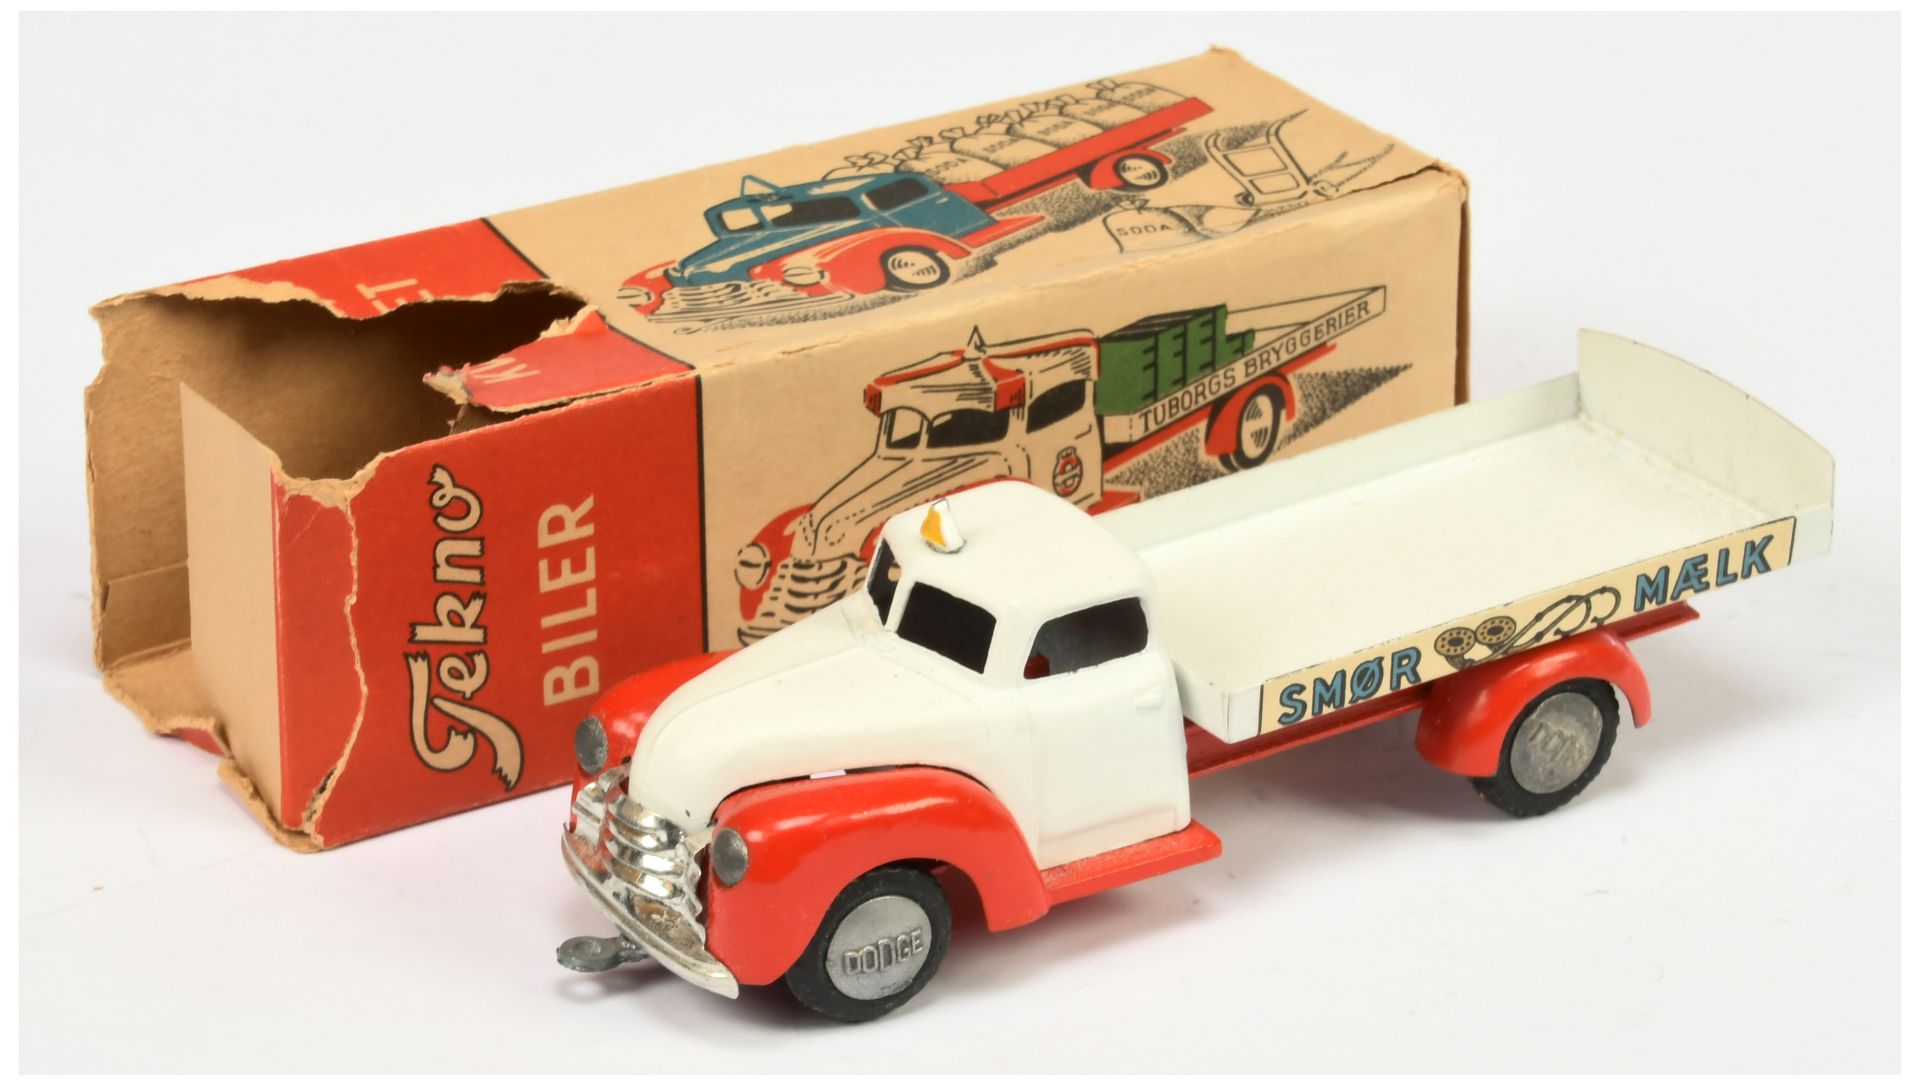 Tekno  Dodge "SMOR Milk"  Delivery Truck - White and red, chrome trim - Good Plus bright example ...